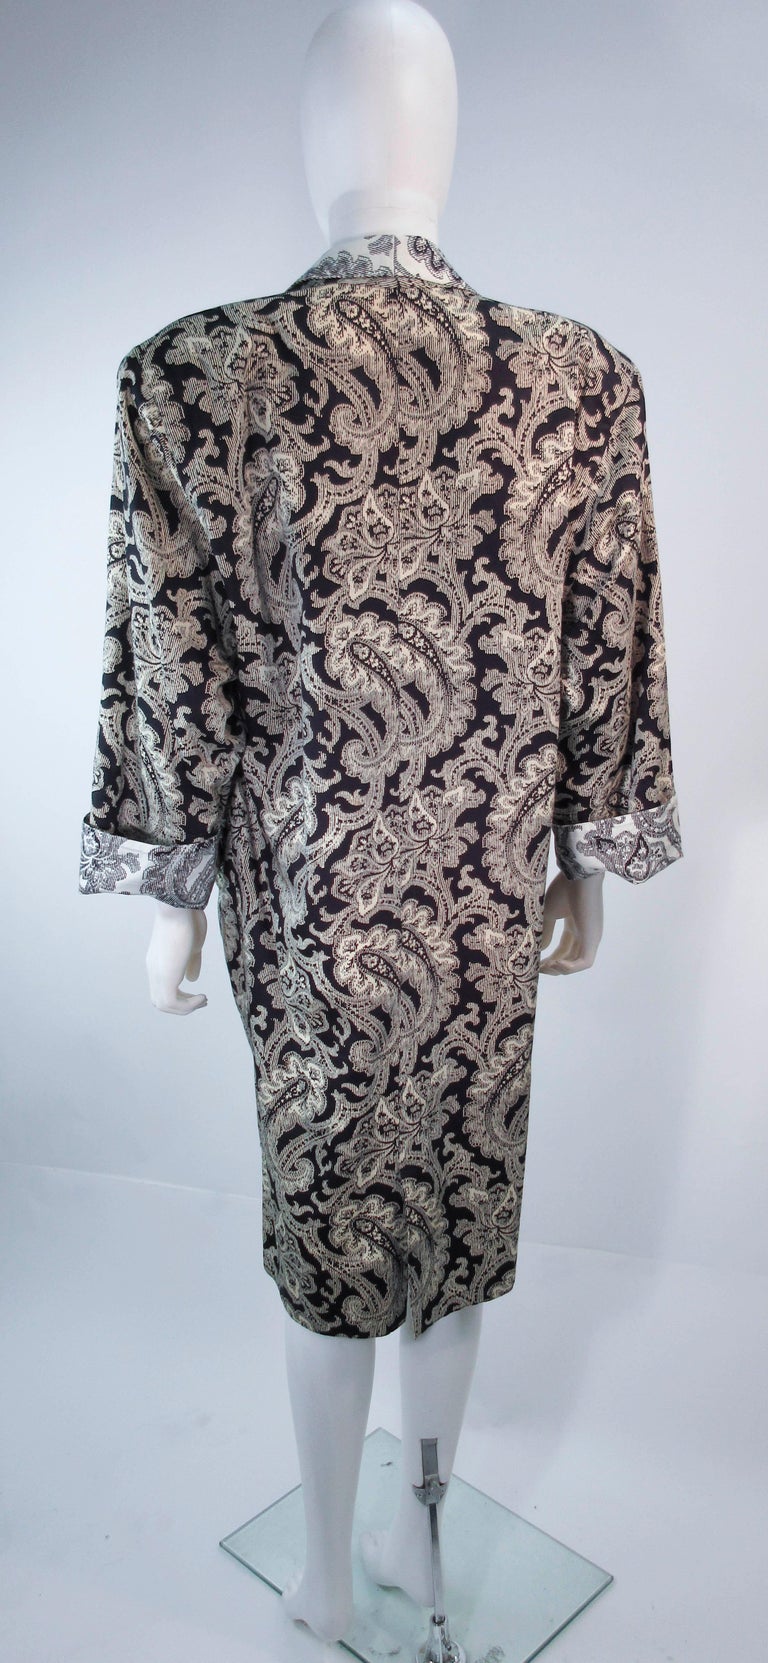 GIANNI VERSACE Vintage Black and White Venetian Coat Size 42 at 1stDibs